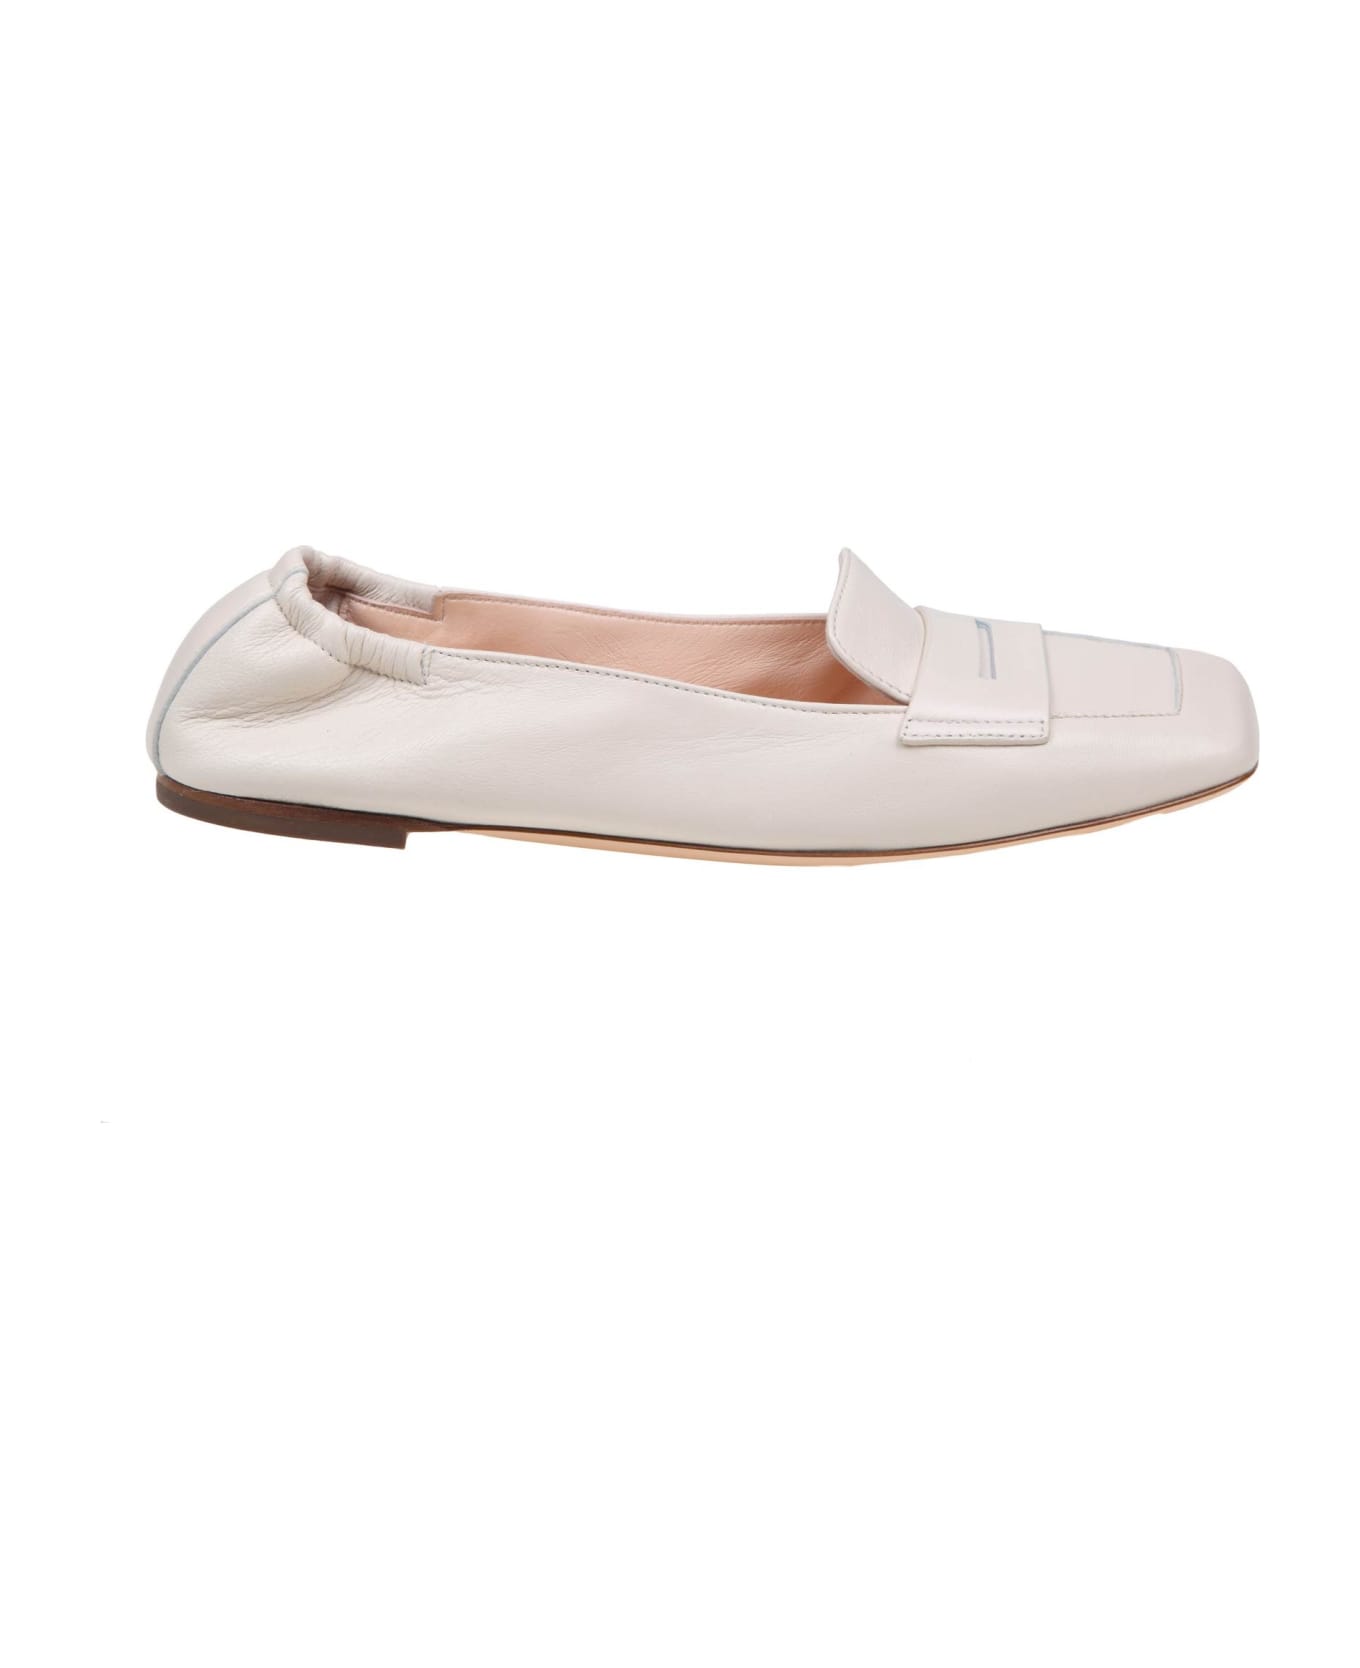 AGL Rina Loafers In Chalk Color Leather - PLASTER